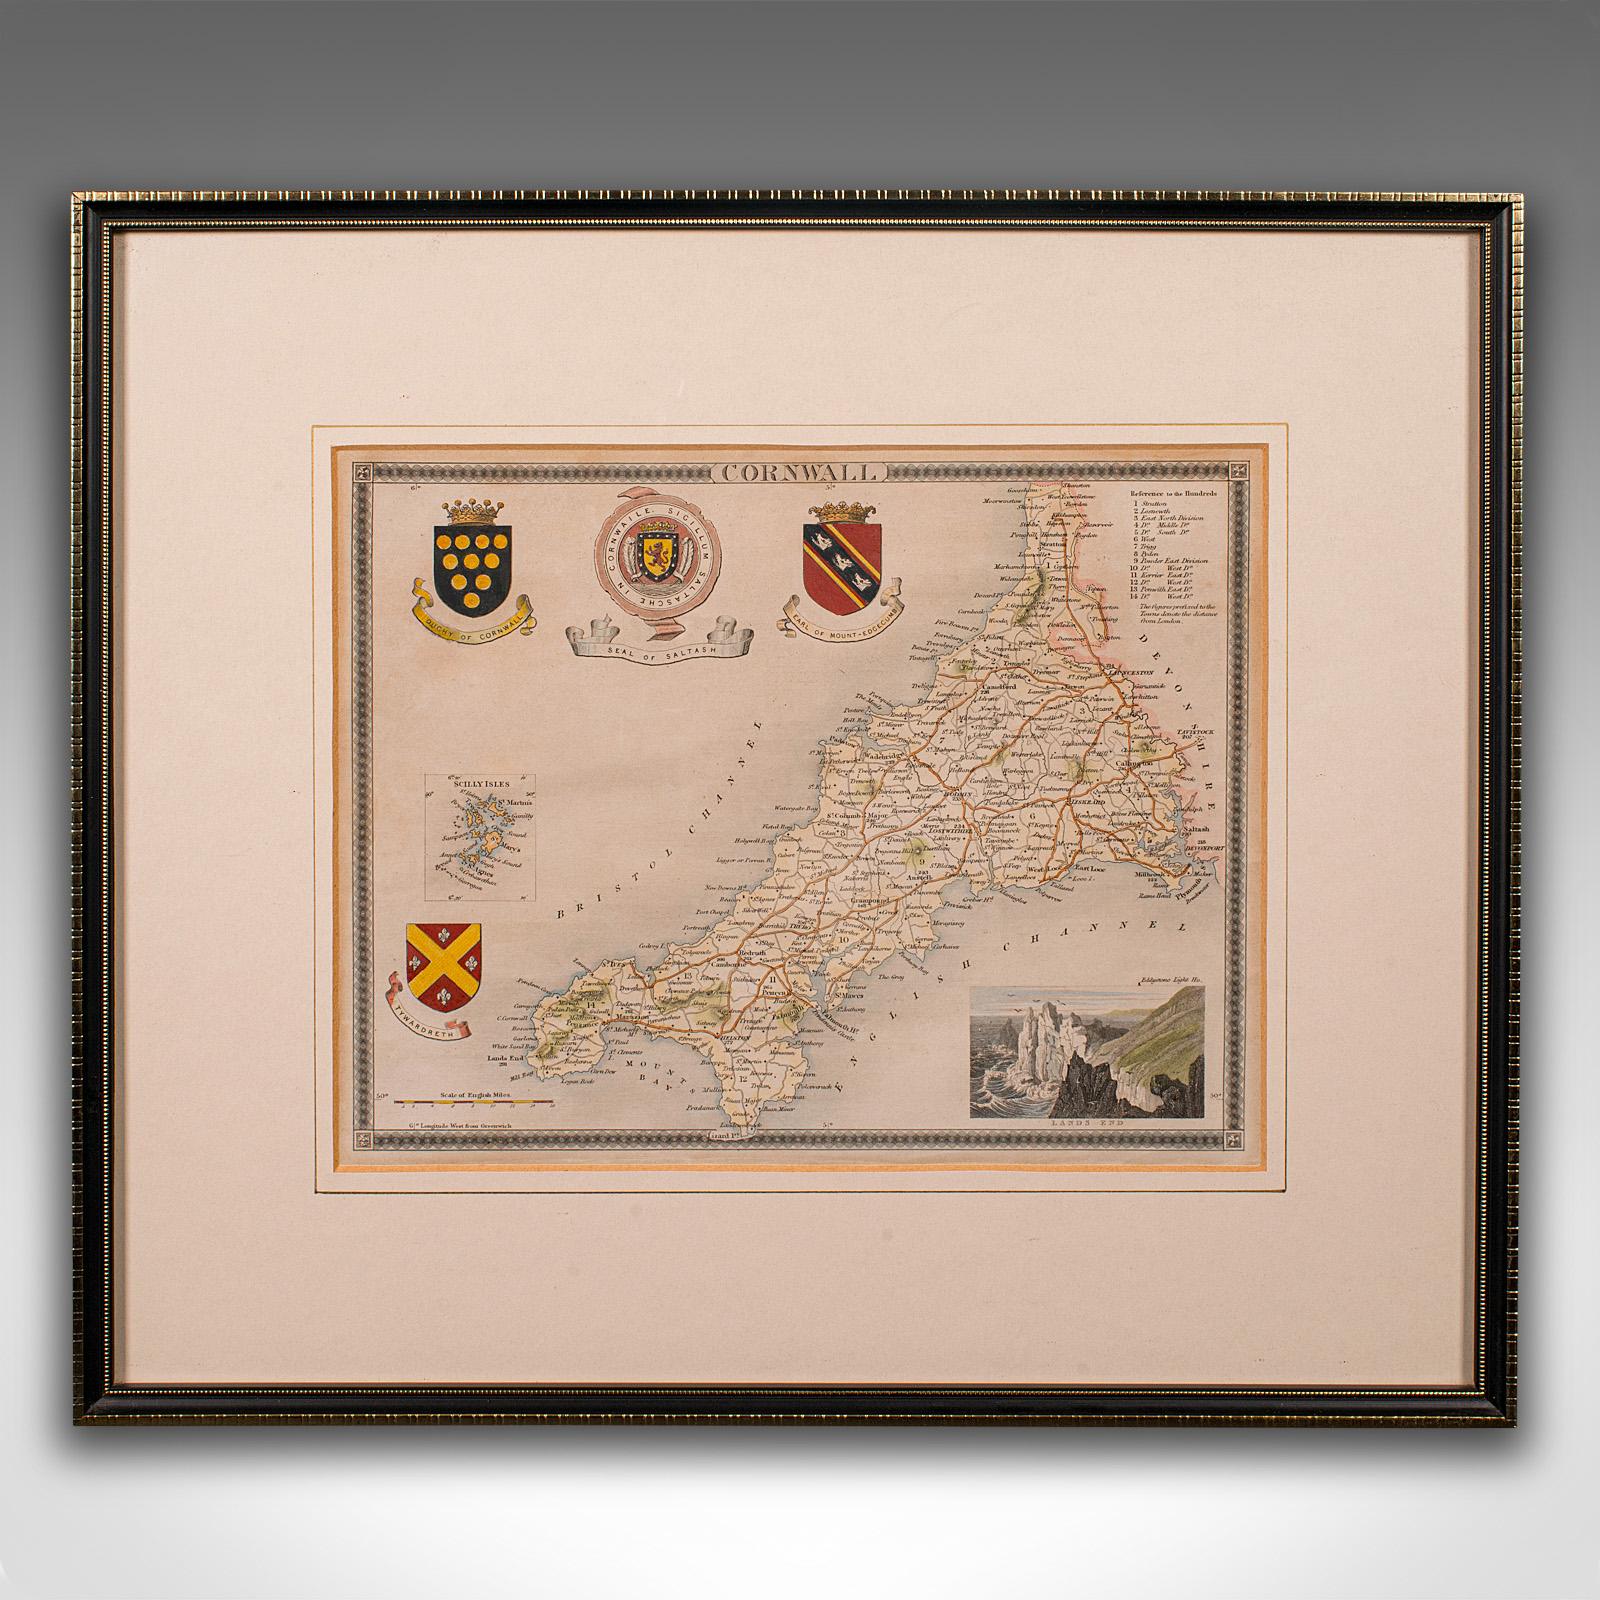 This is an antique lithography map of the Duchy of Cornwall. An English, framed atlas engraving of cartographic interest, dating to the early 19th century and later.

Superb lithography of Conrwall and its county detail, perfect for